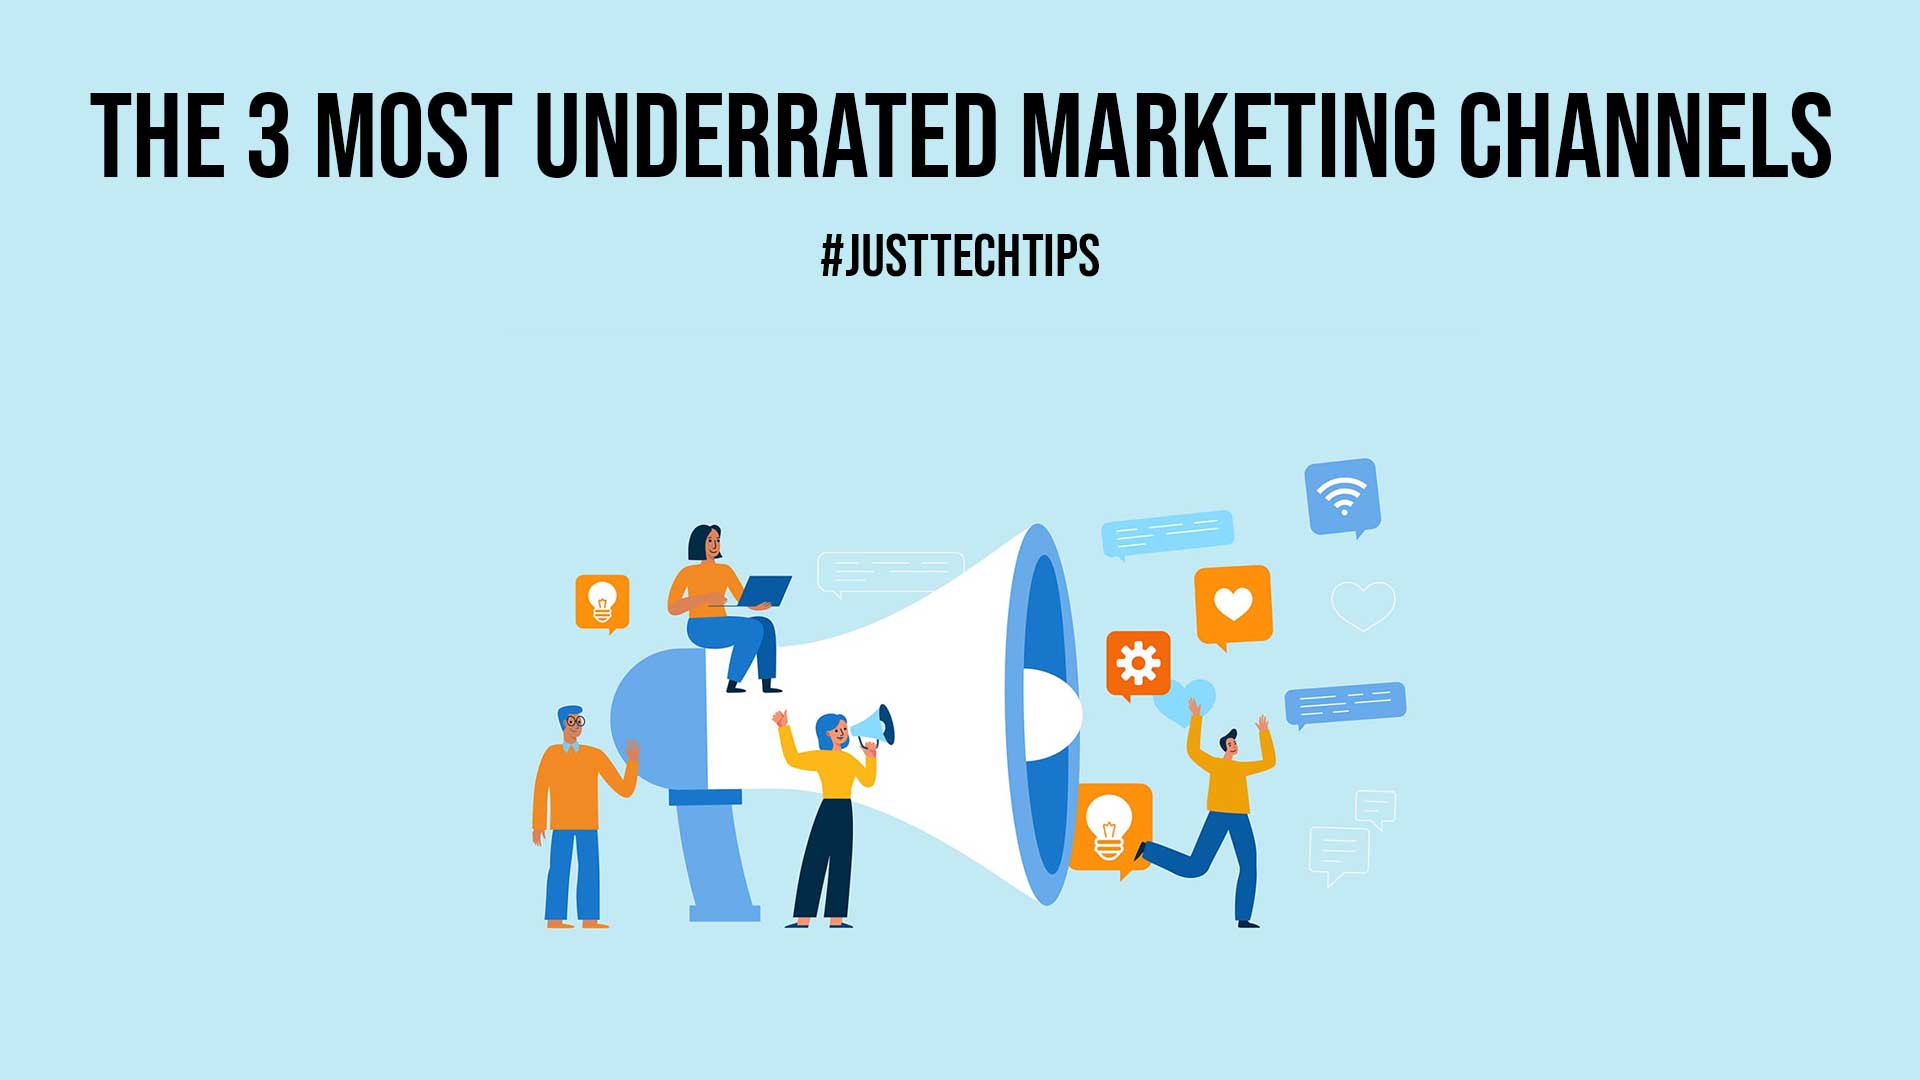 The 3 Most Underrated Marketing Channels